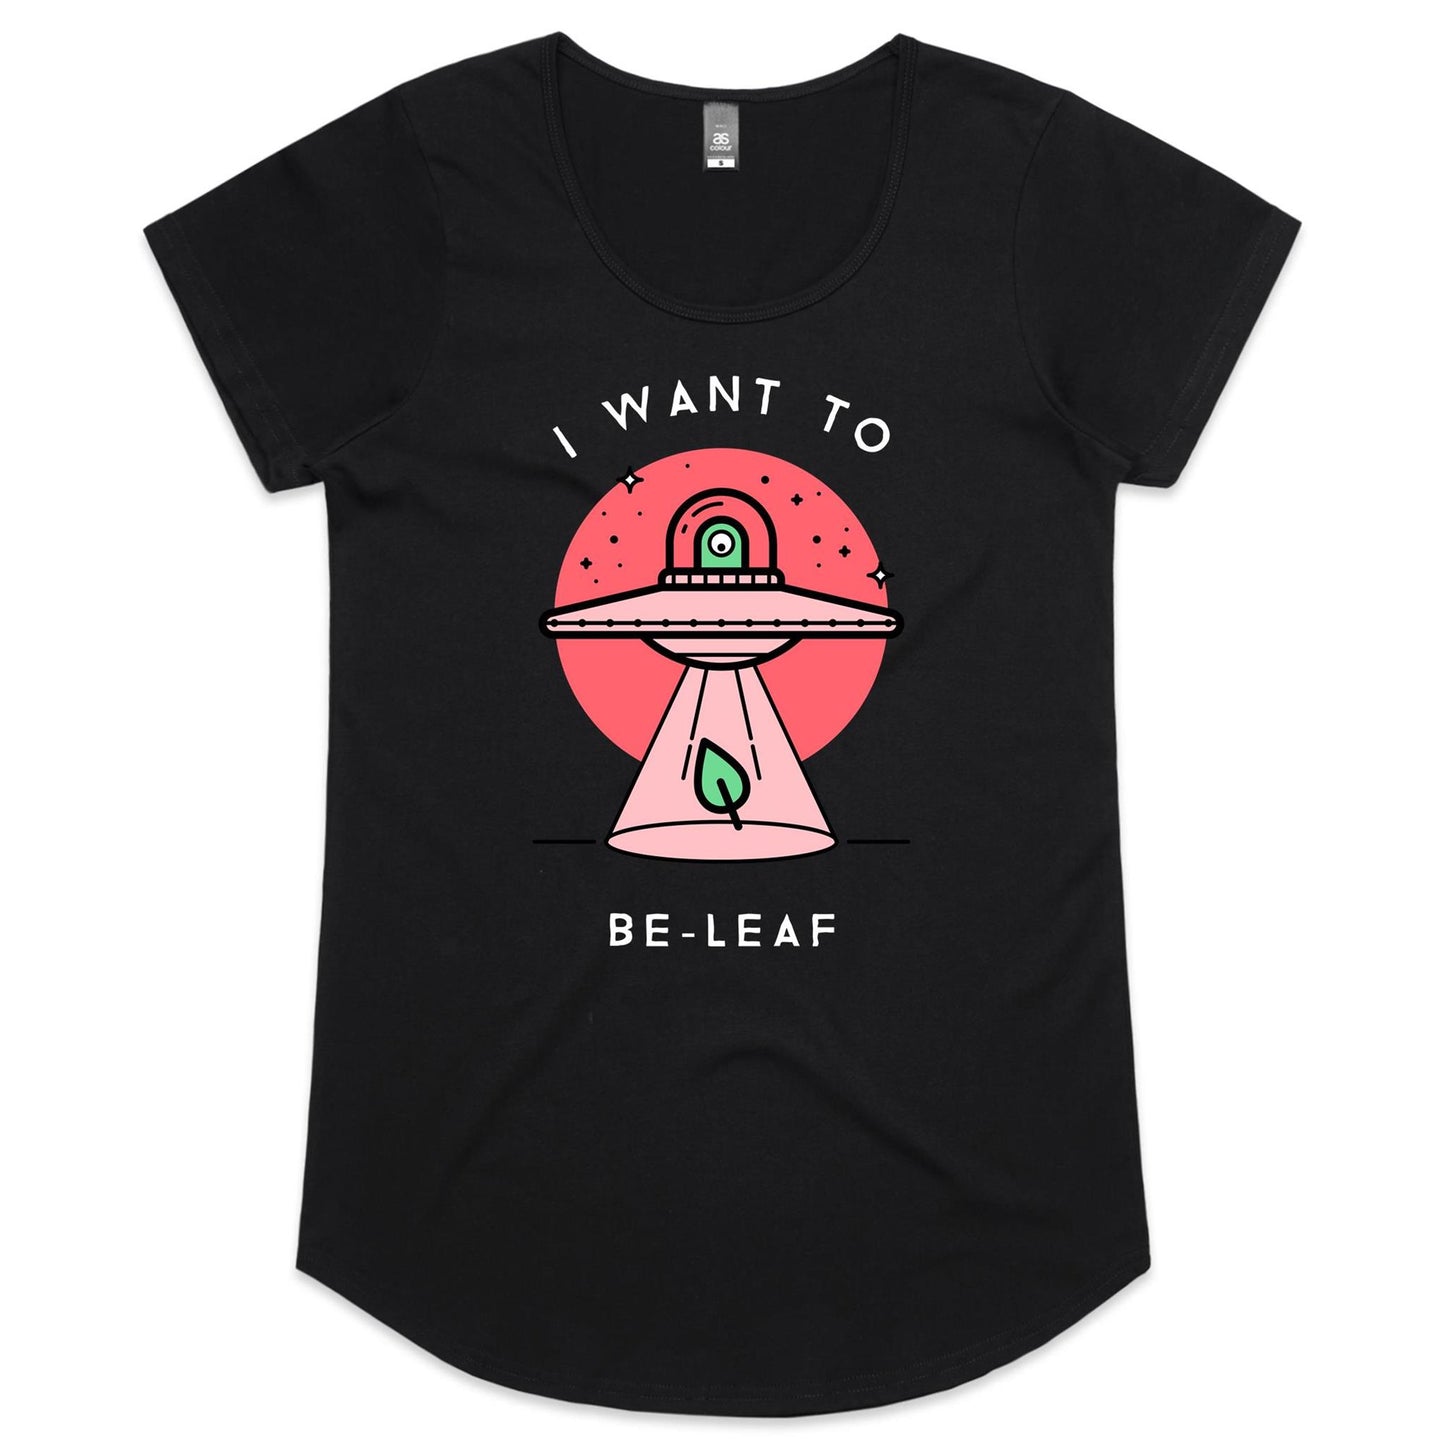 I Want To Be-Leaf, UFO - Womens Scoop Neck T-Shirt Black Womens Scoop Neck T-shirt Sci Fi